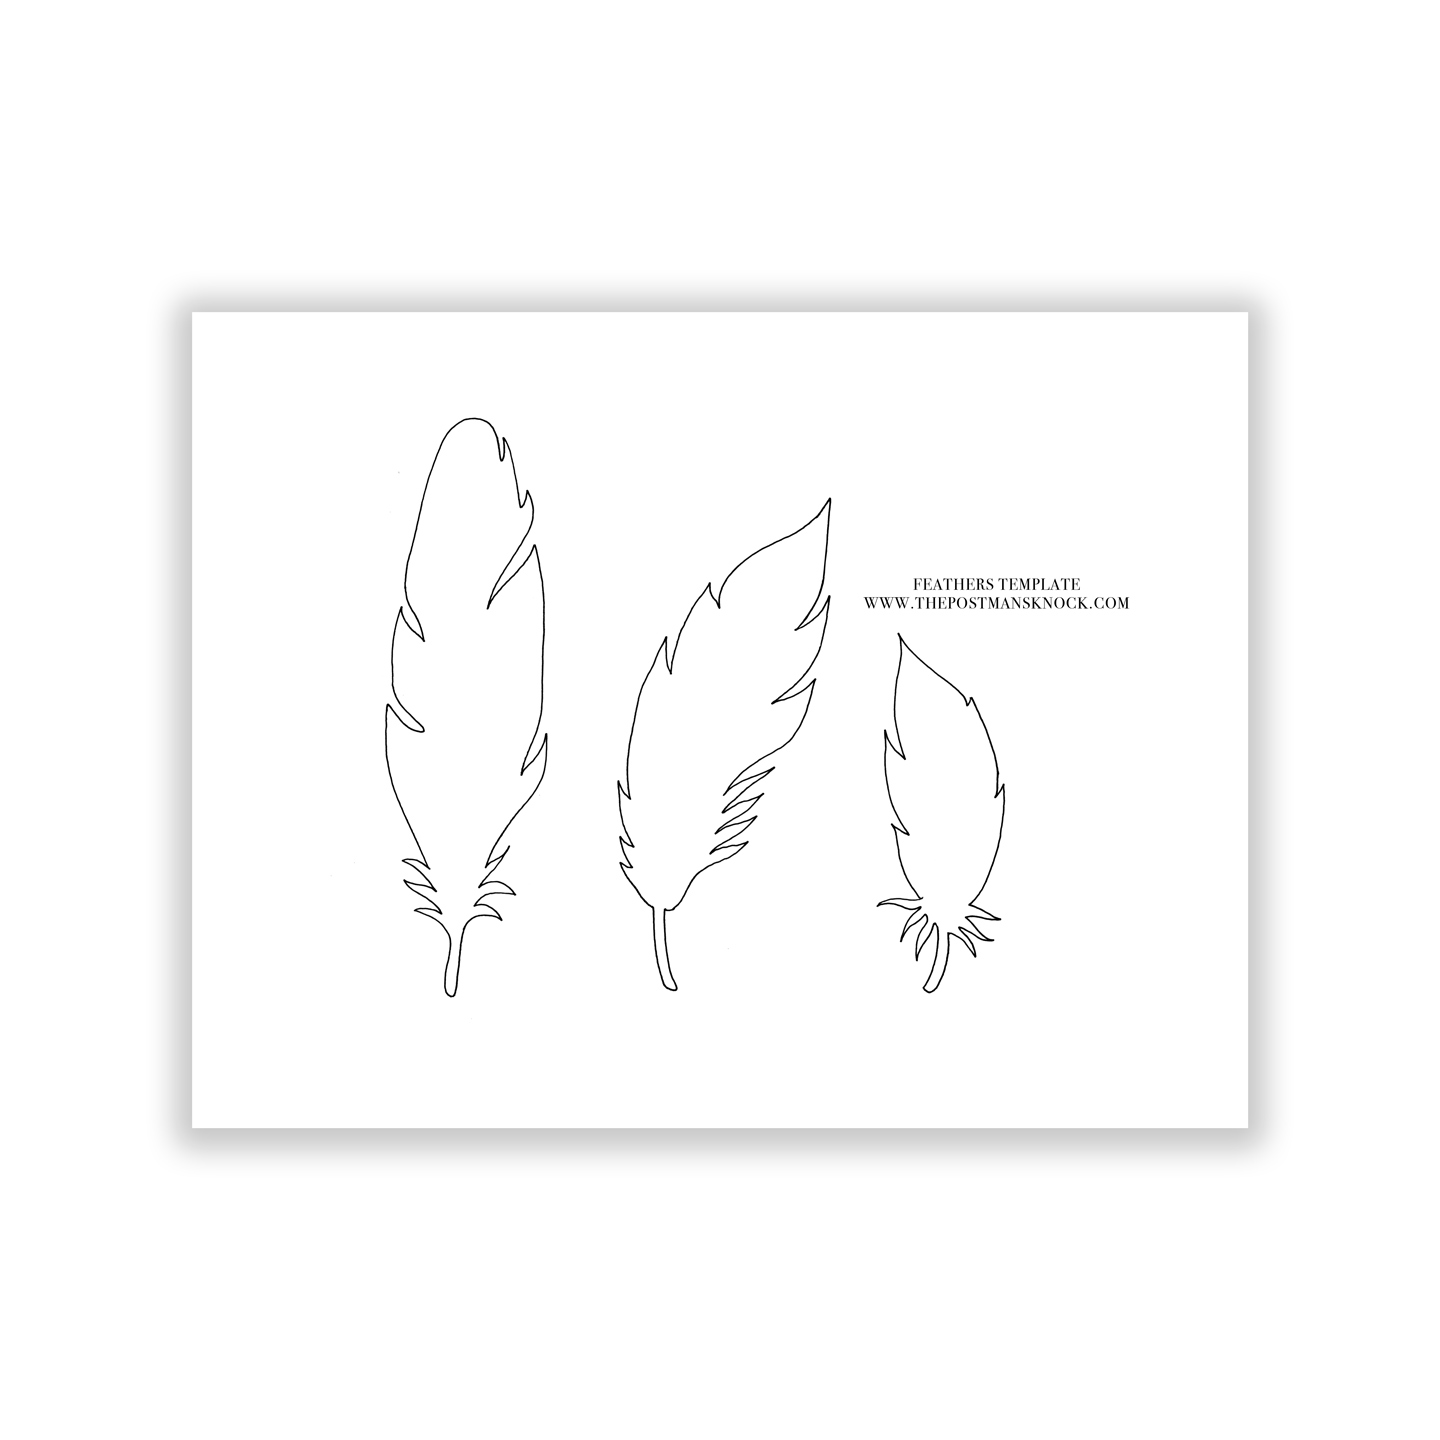 Paper Feathers Template The Postman #39 s Knock